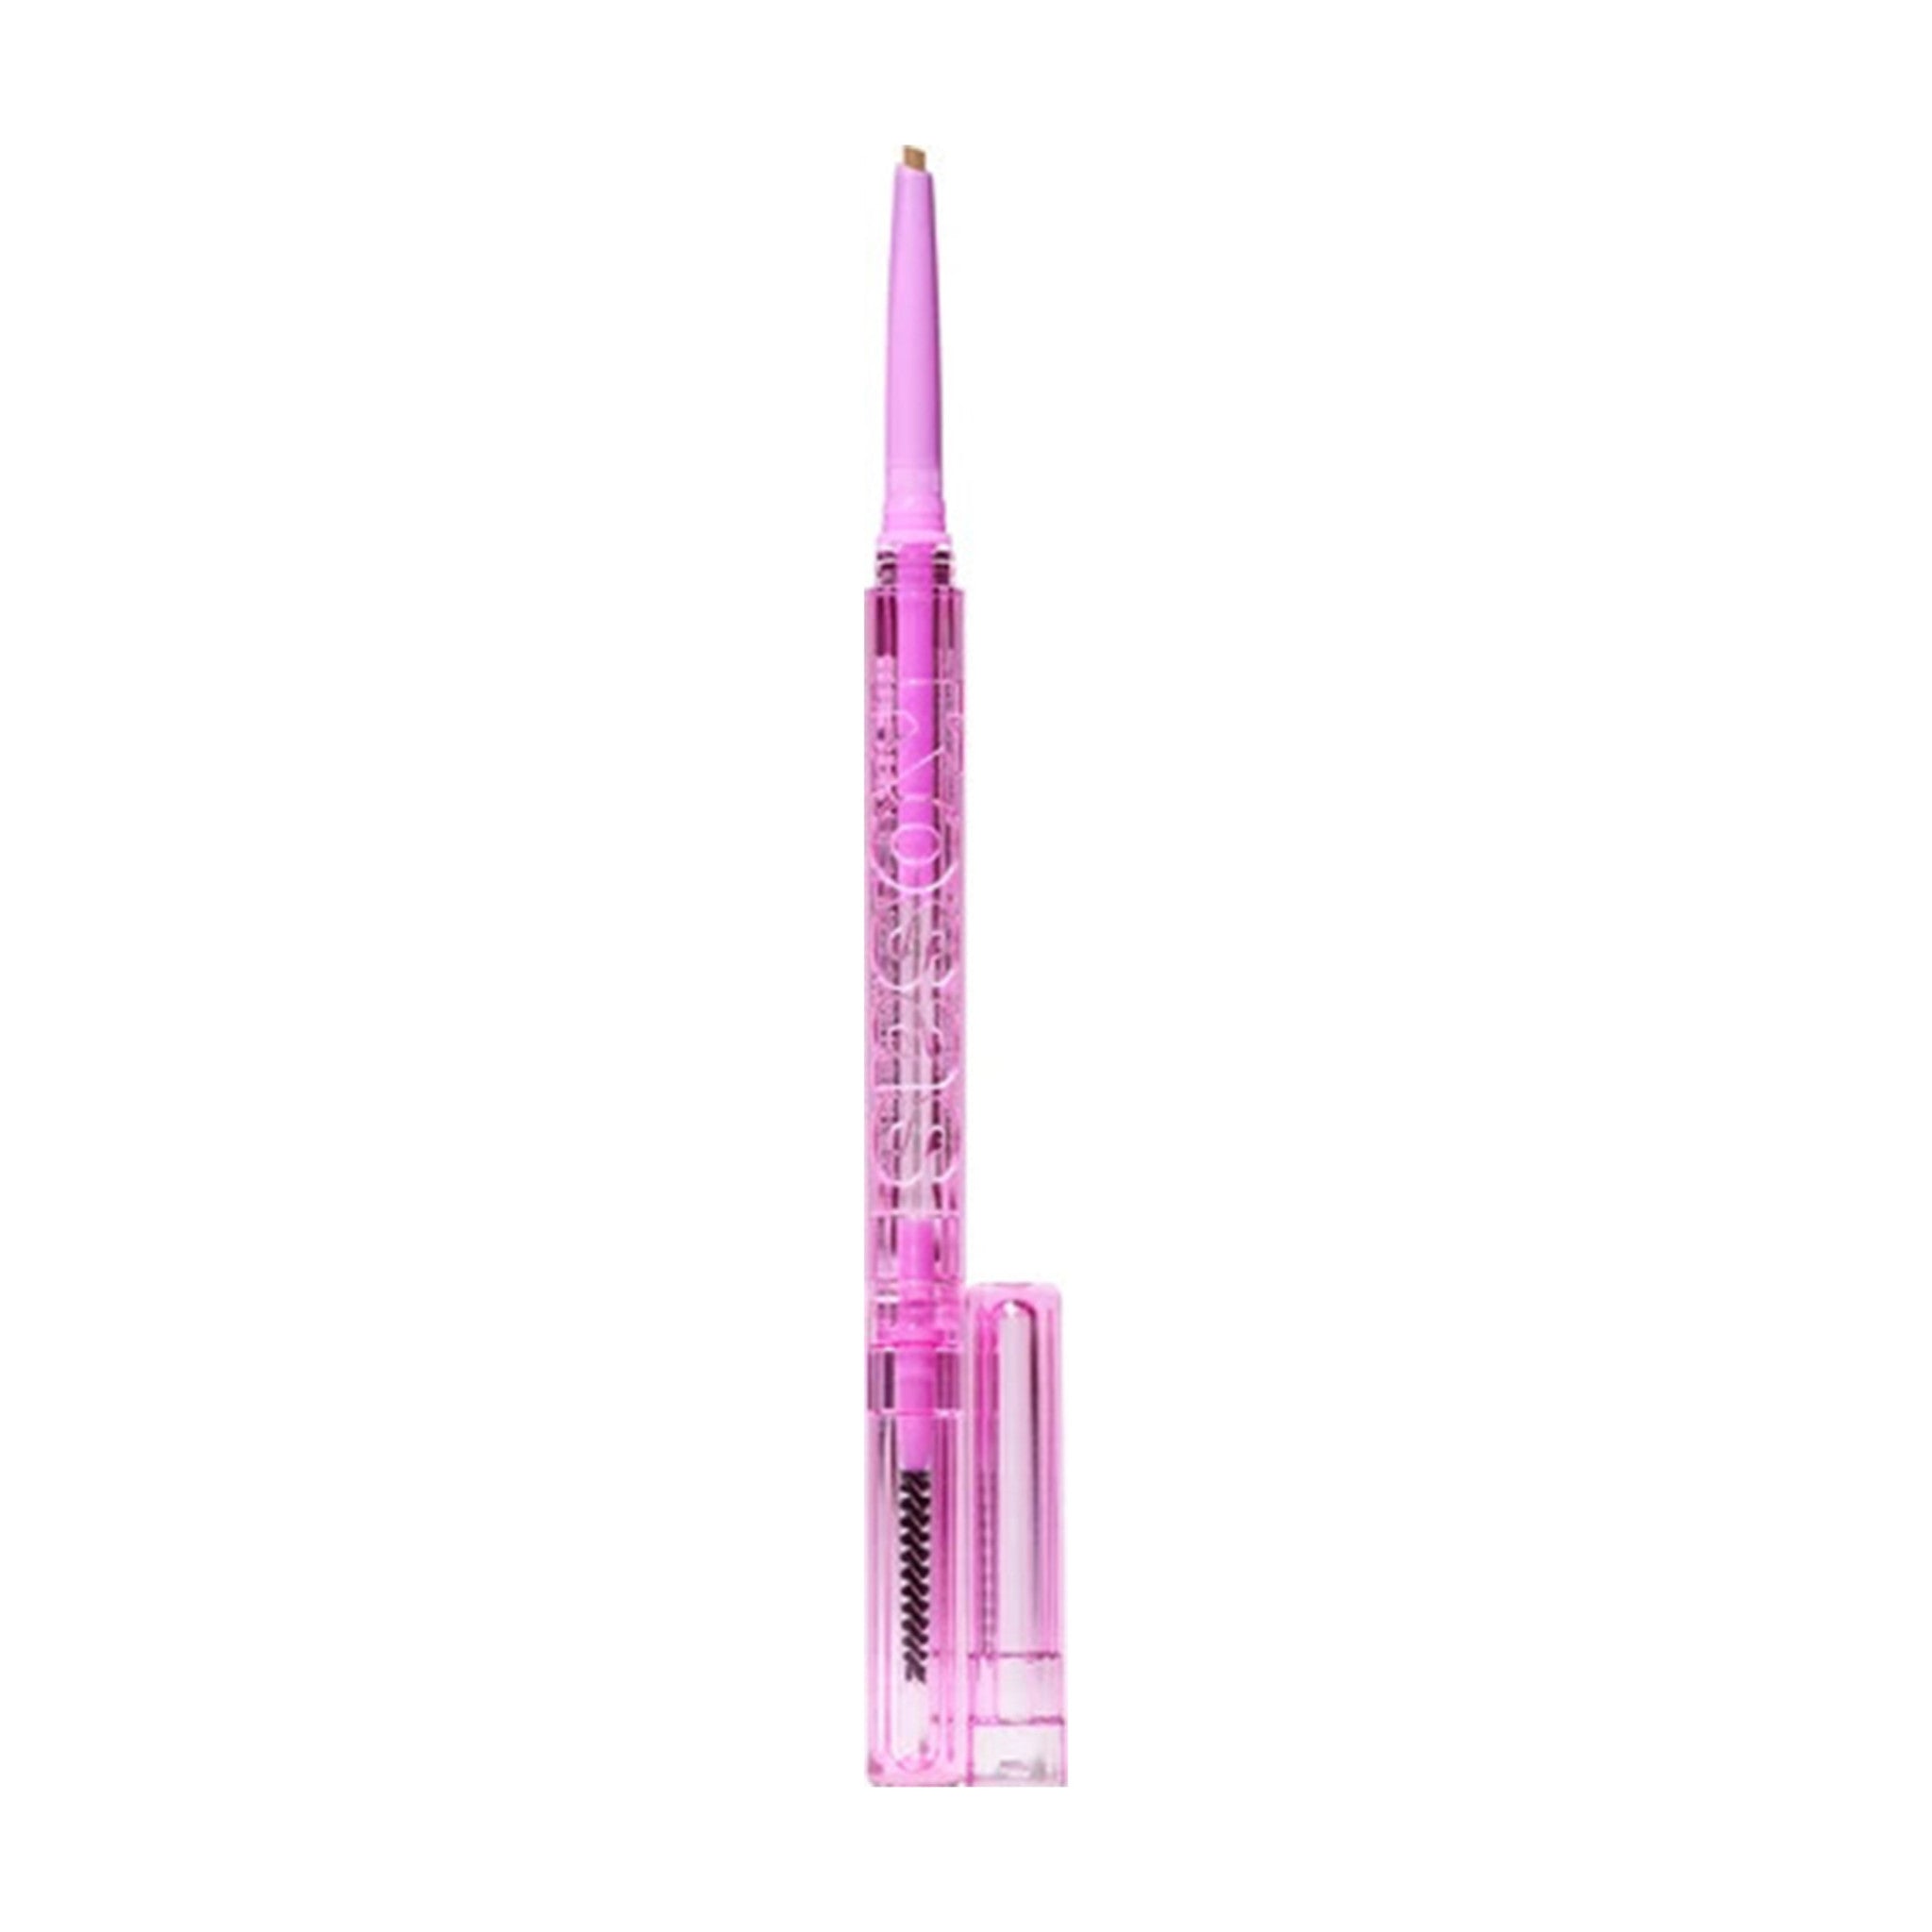 Kosas Brow Pop Dual-Action Defining Pencil Color/Shade variant: Honey Blonde main image. This product is in the color bronze